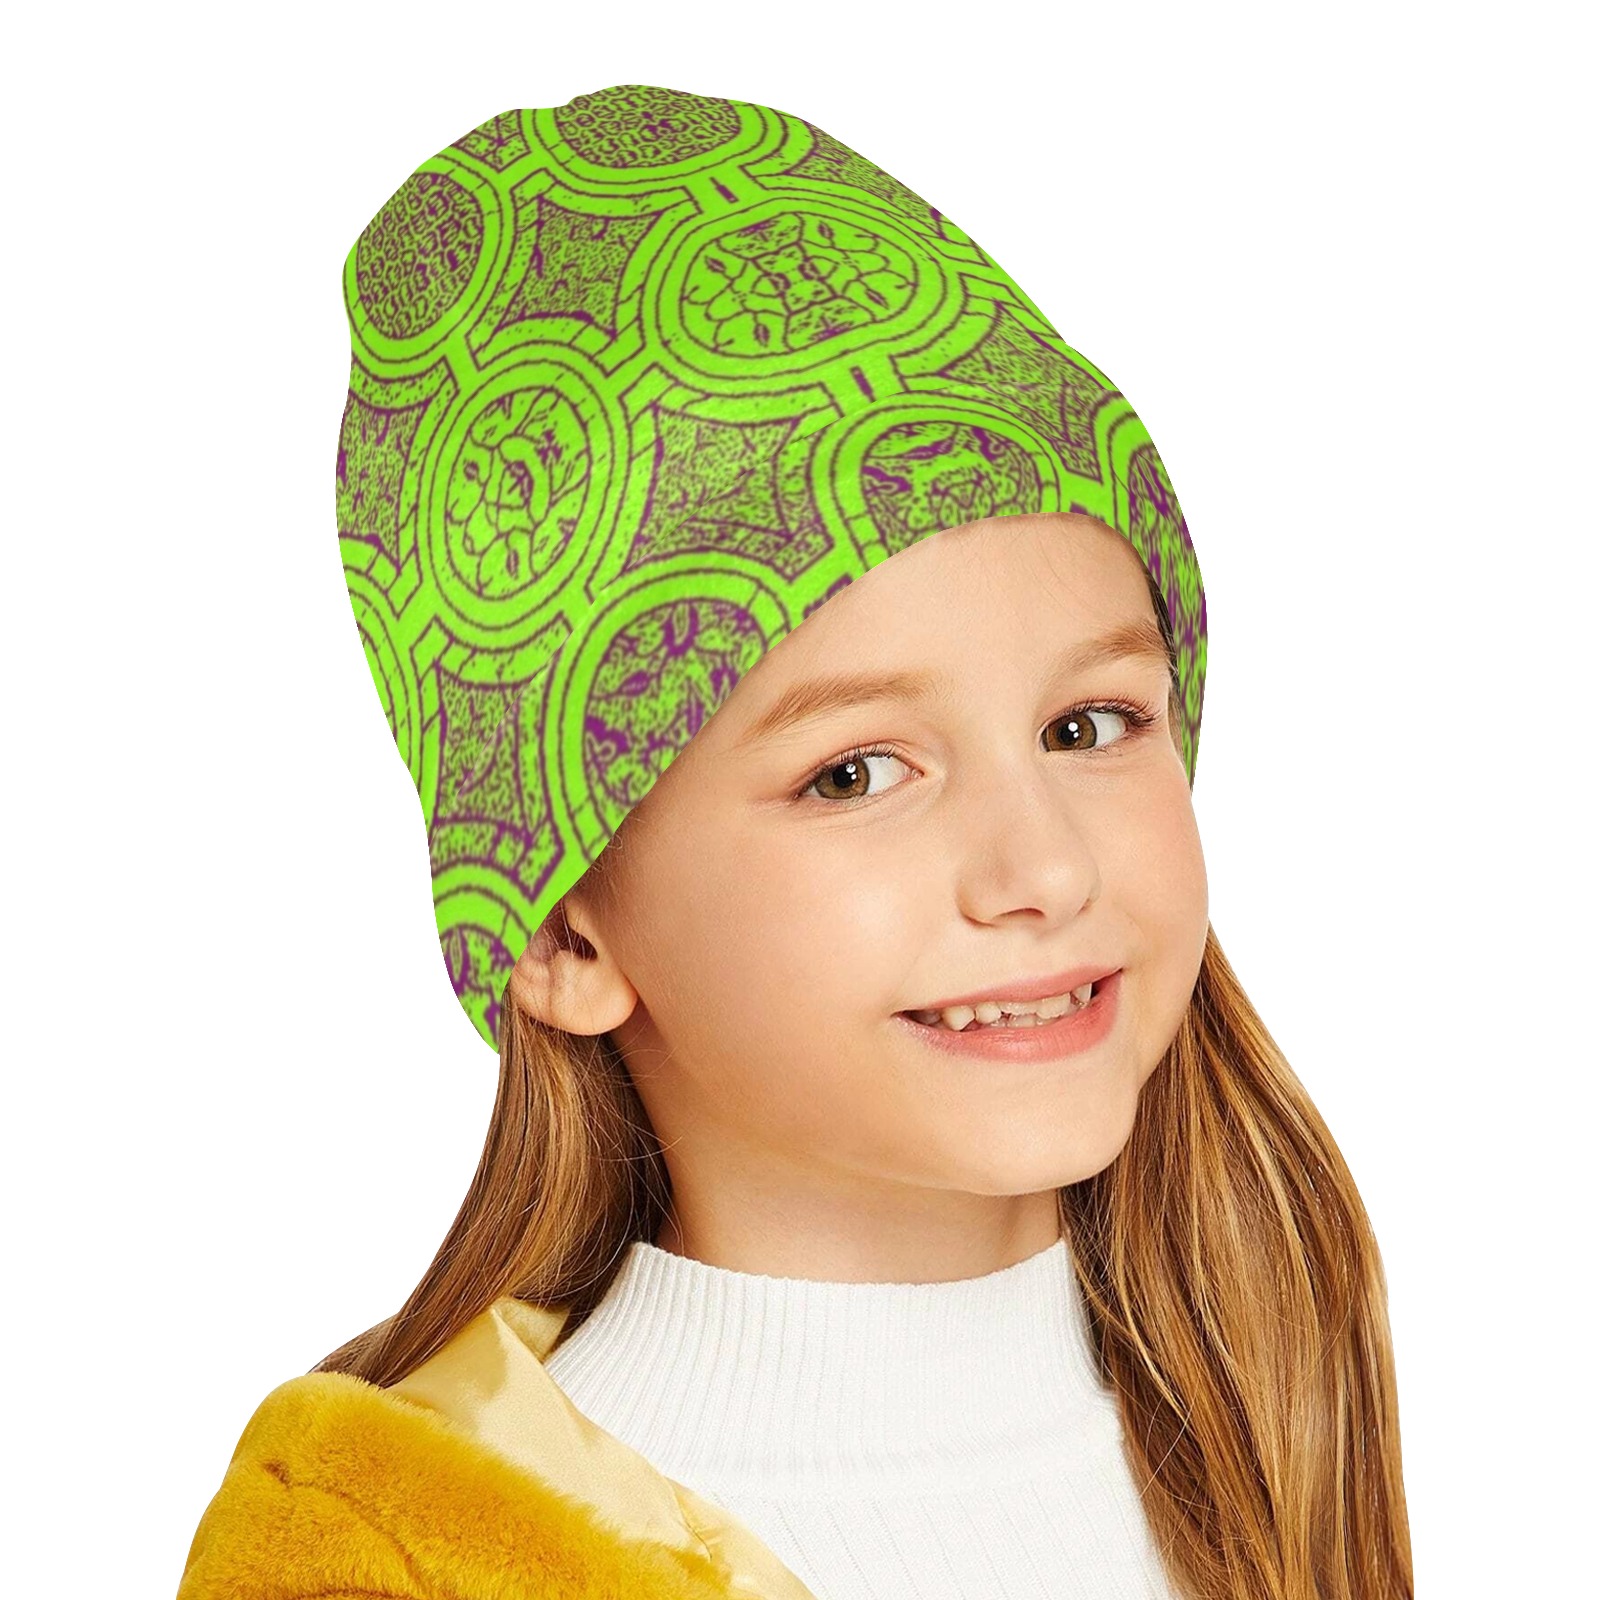 AFRICAN PRINT PATTERN 2 All Over Print Beanie for Kids